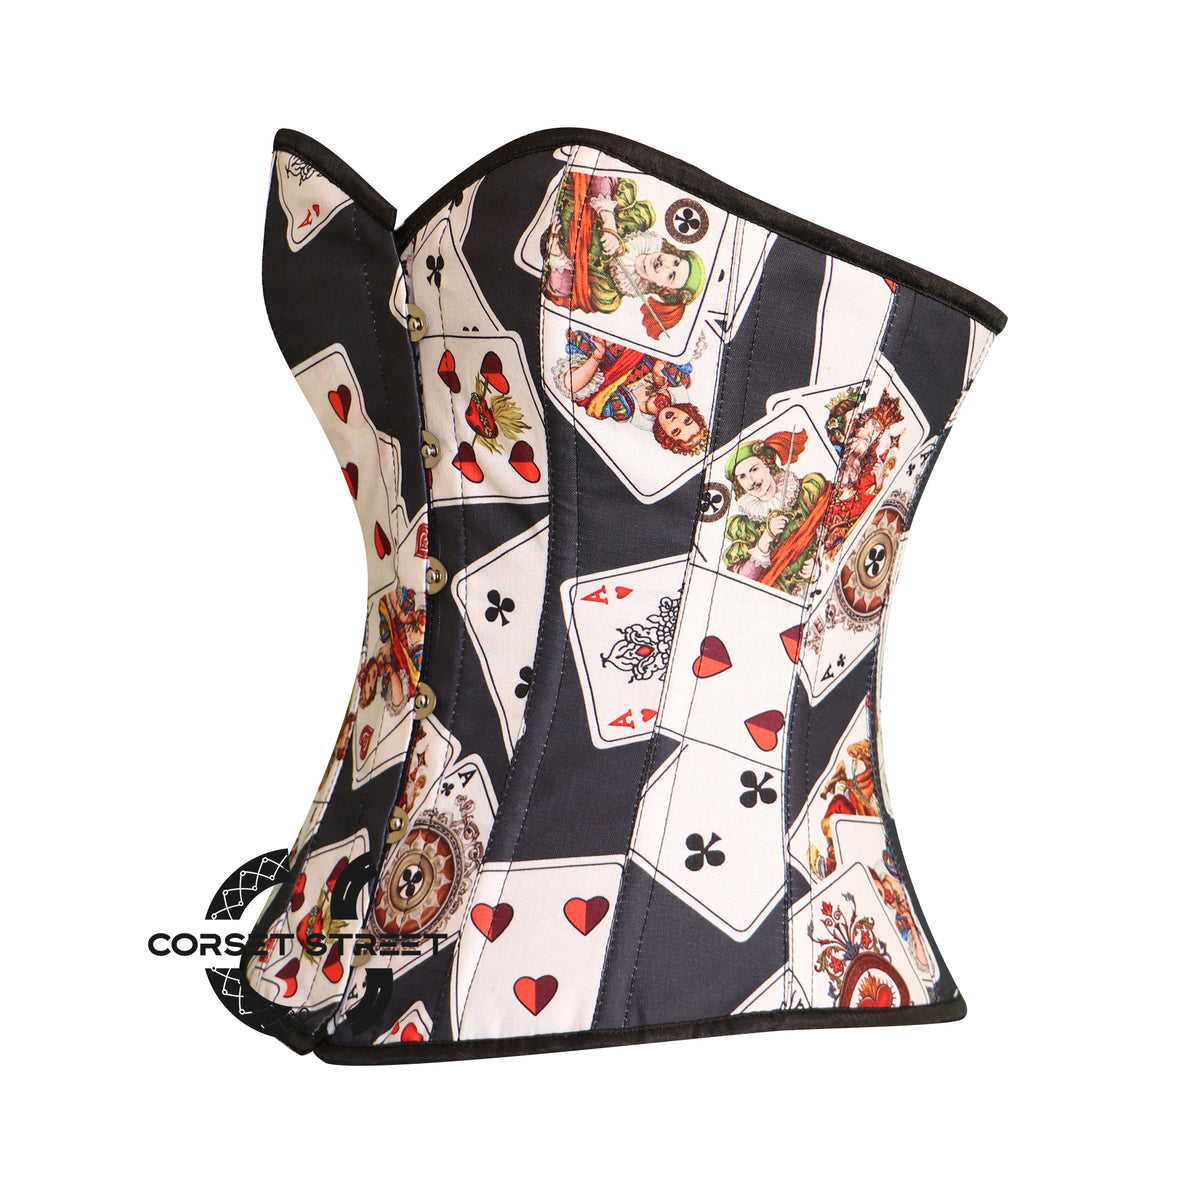 Playing Cards Printed Cotton Corset Gothic Plus Size  Costume Overbust Bustier Top